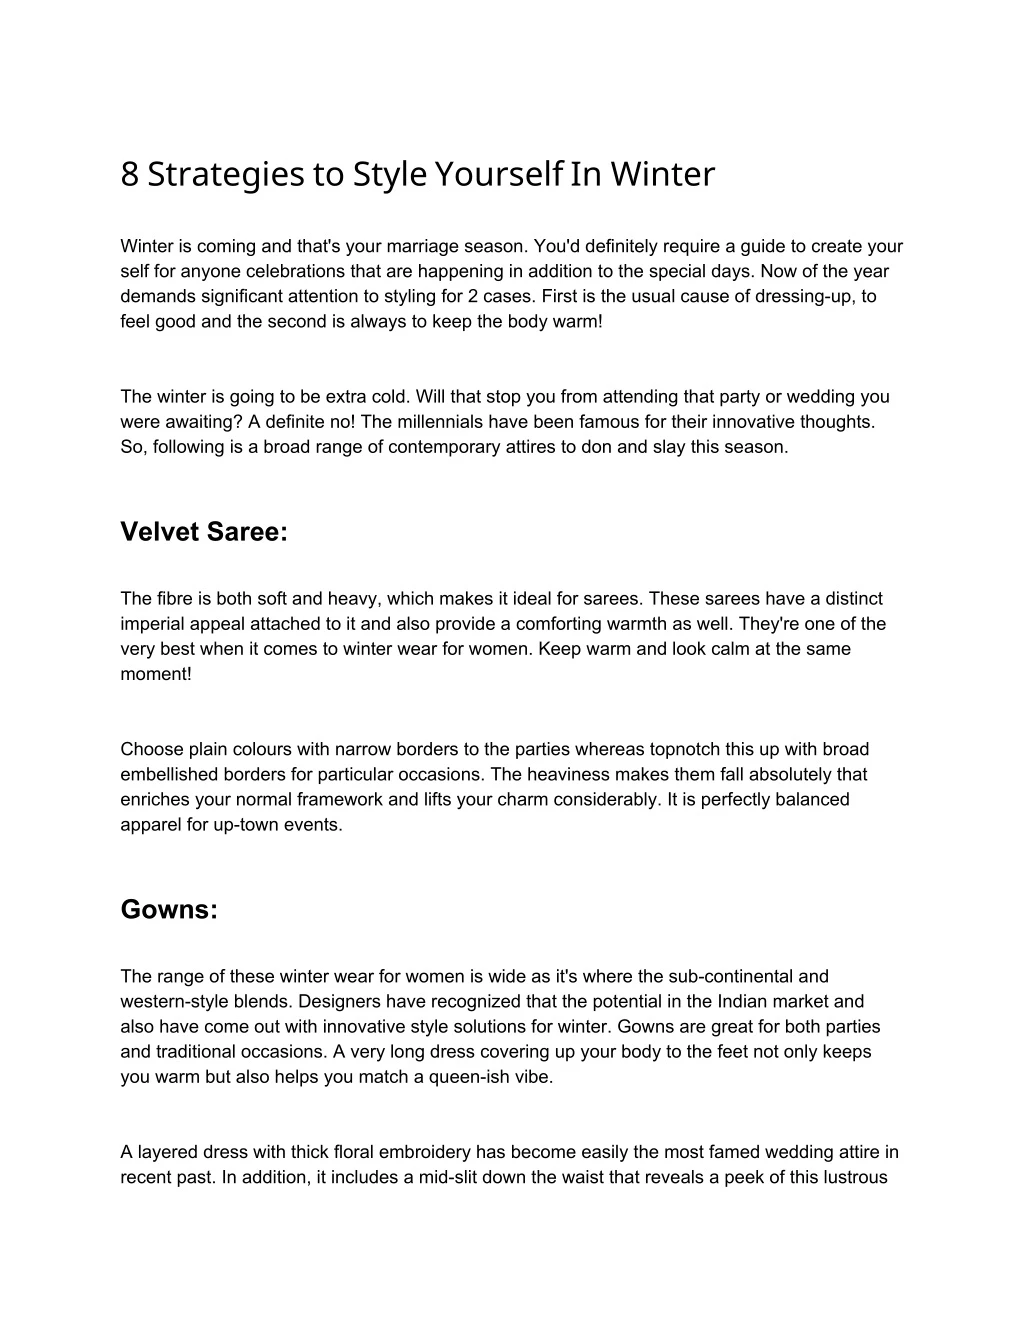 8 strategies to style yourself in winter